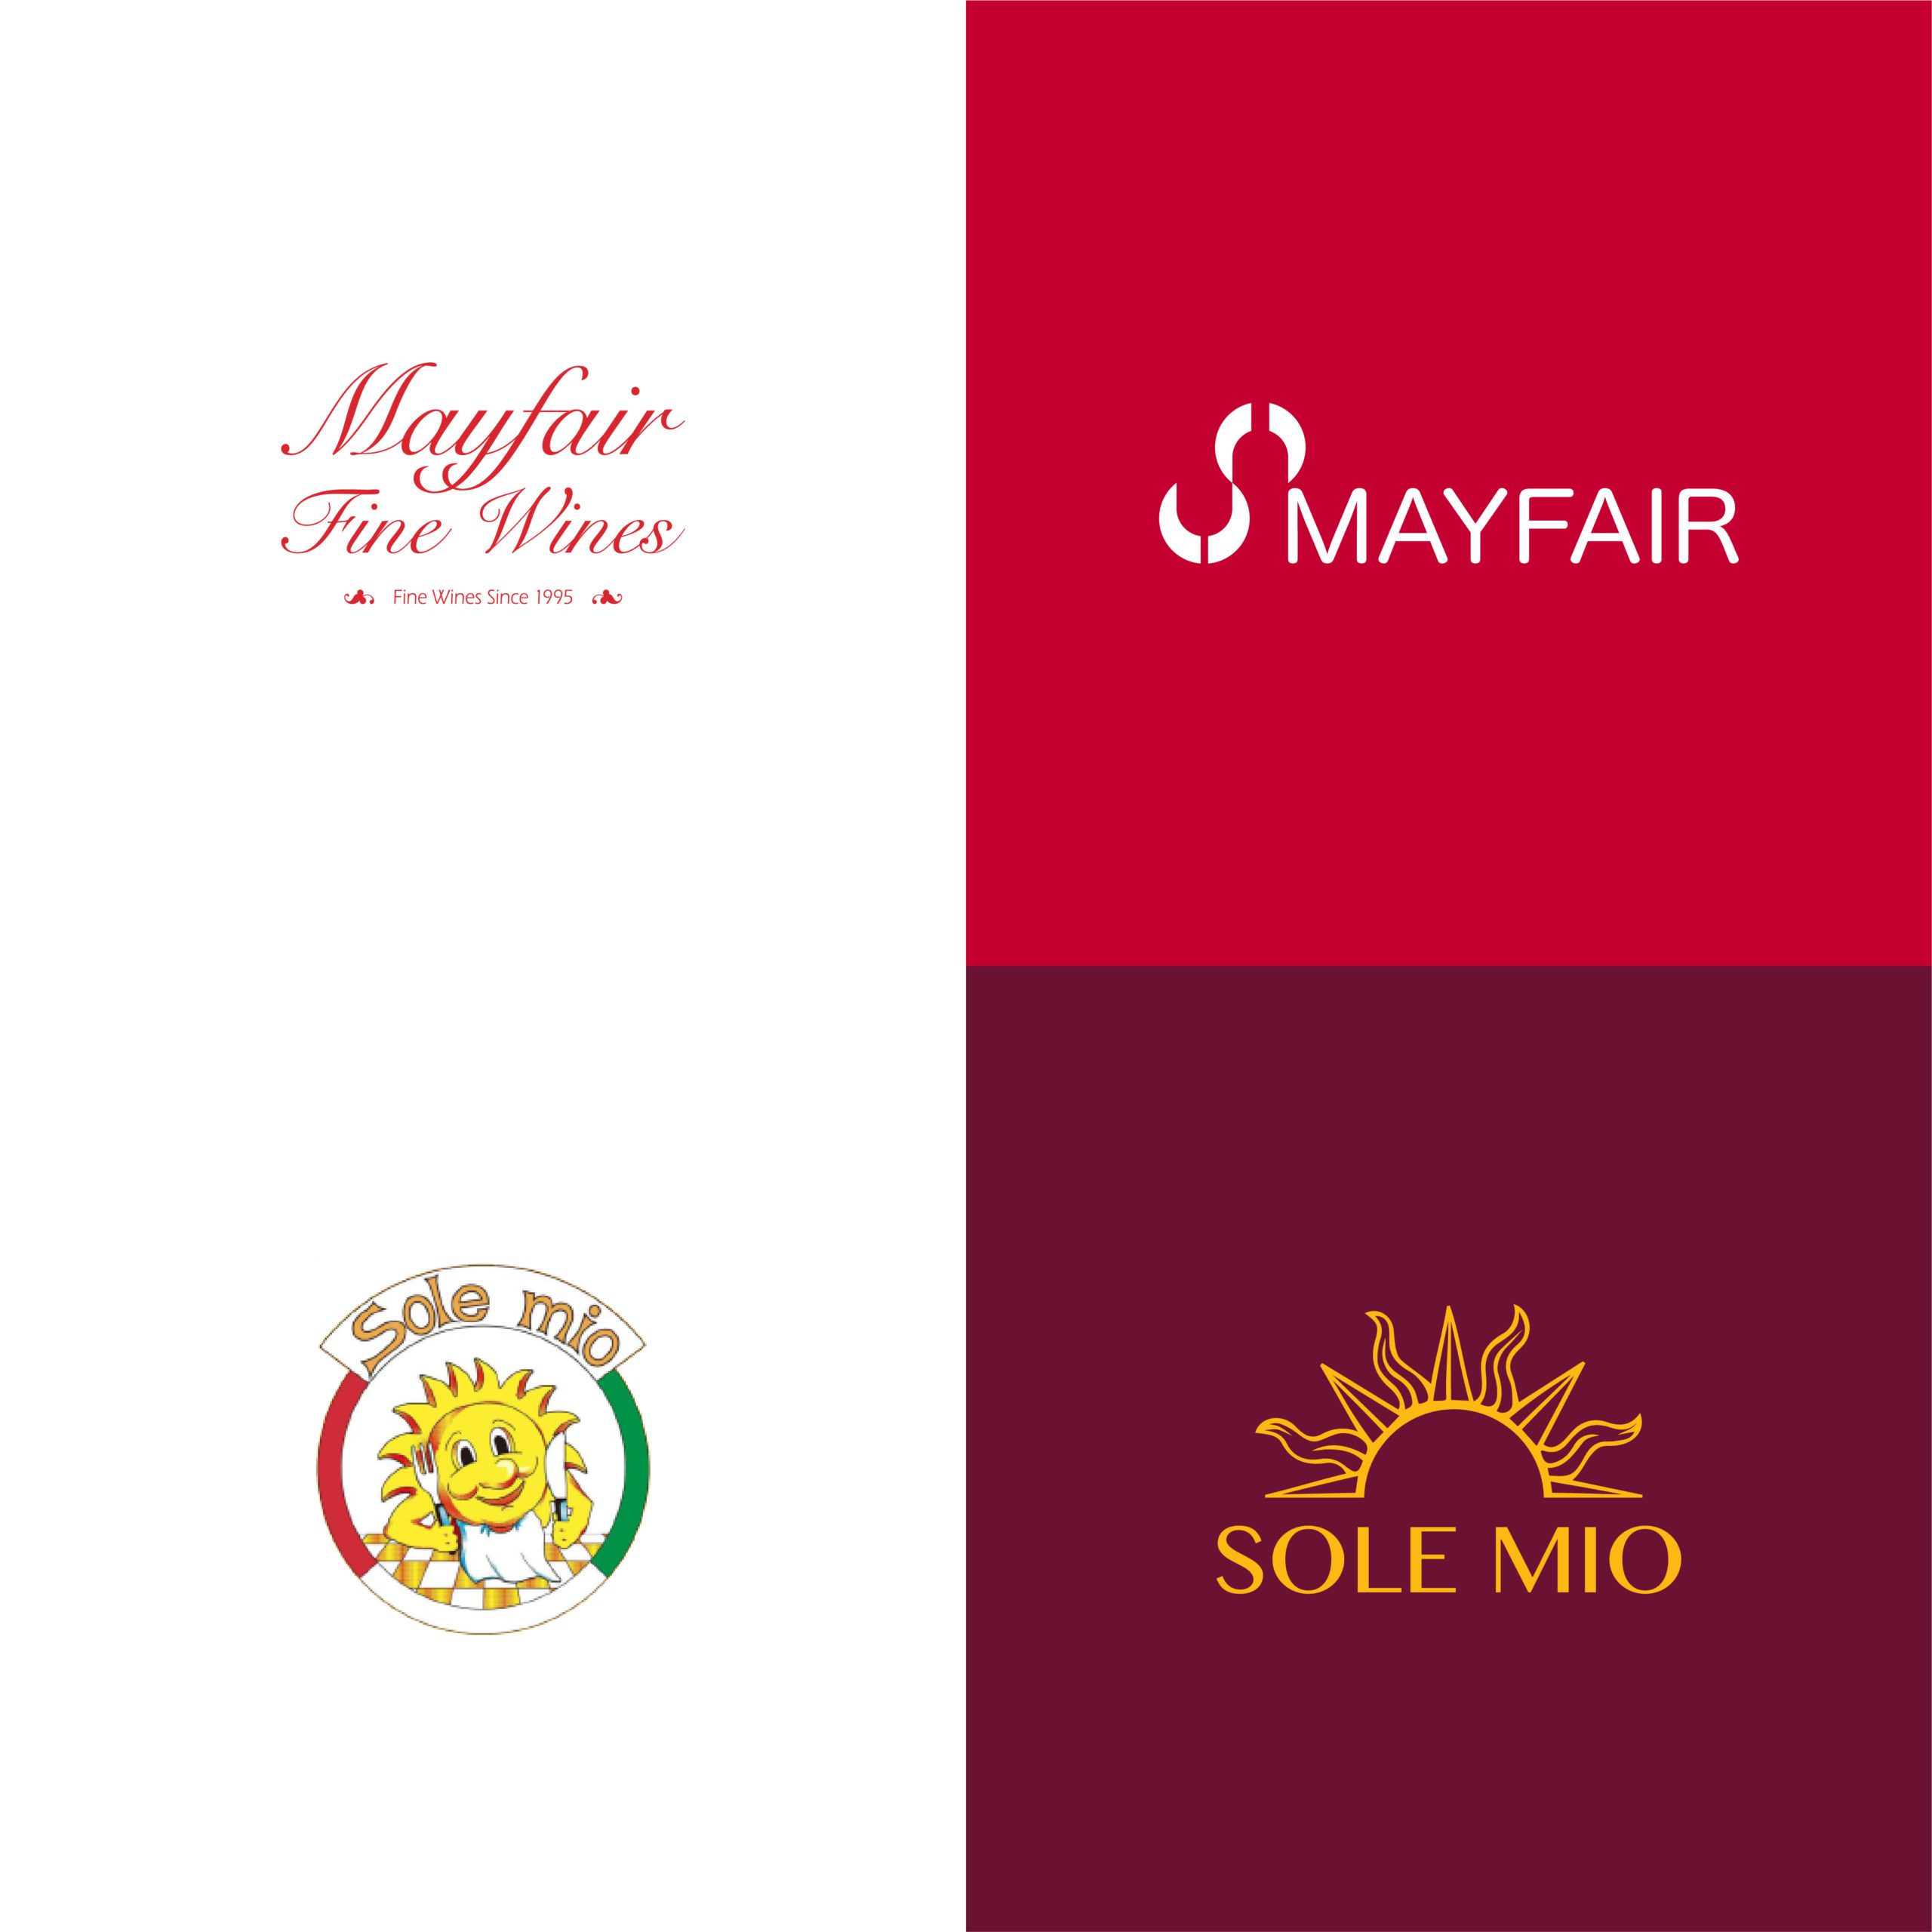 Mayfair and Sole Mio Rebranding